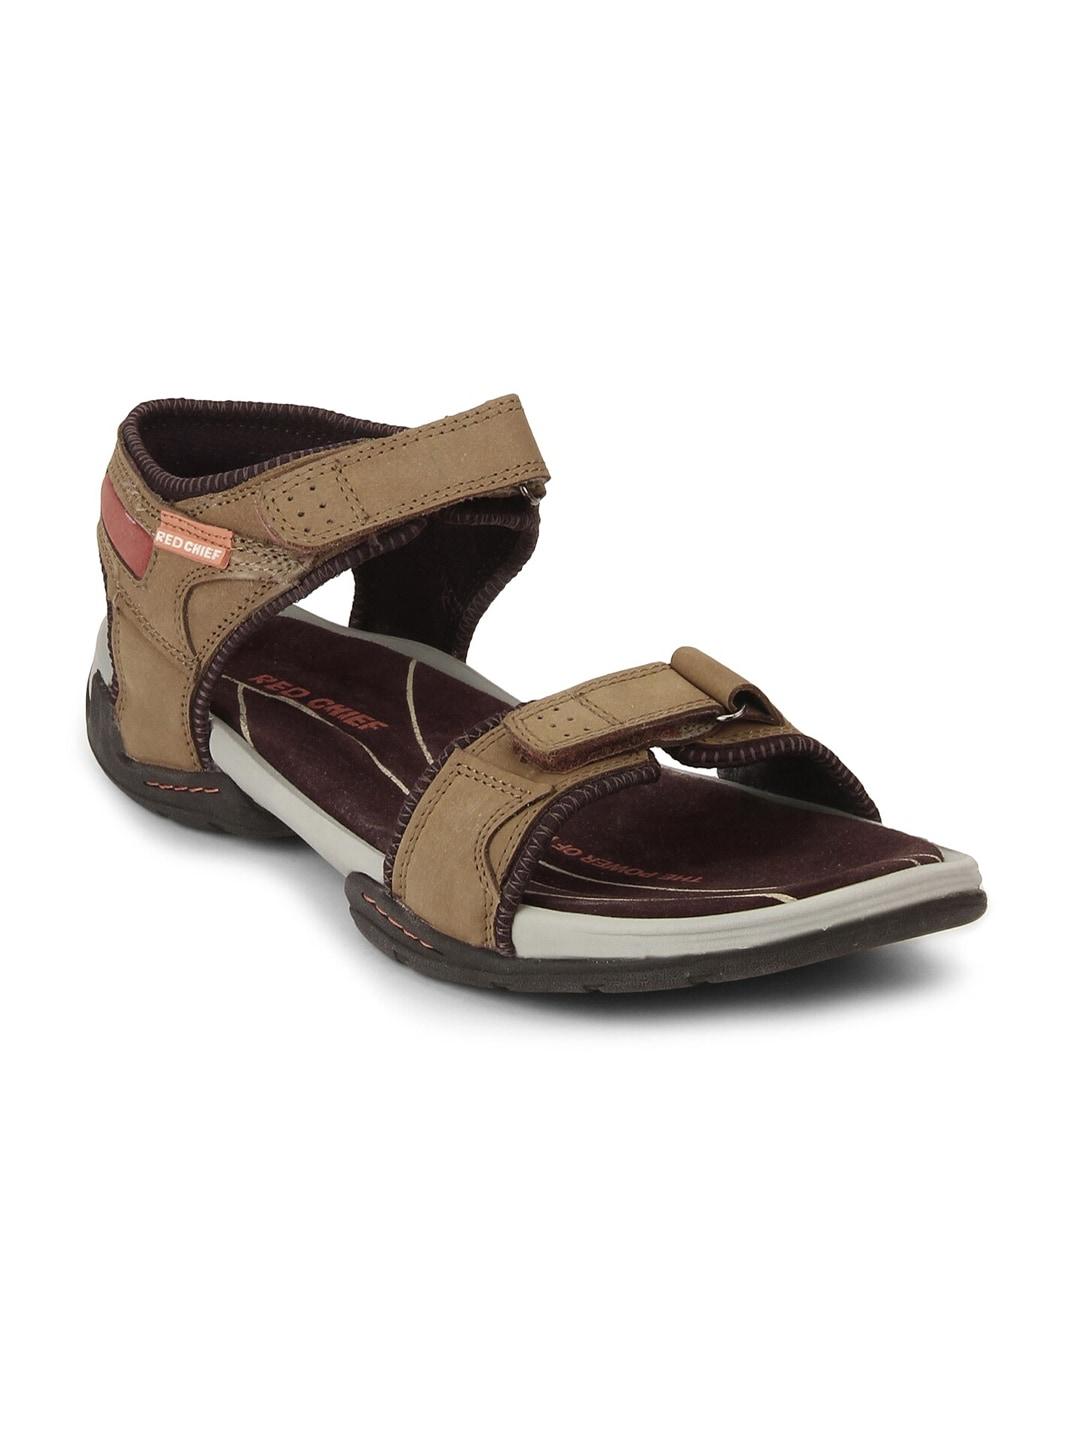 Red Chief Men Camel Brown Printed Sports Sandals